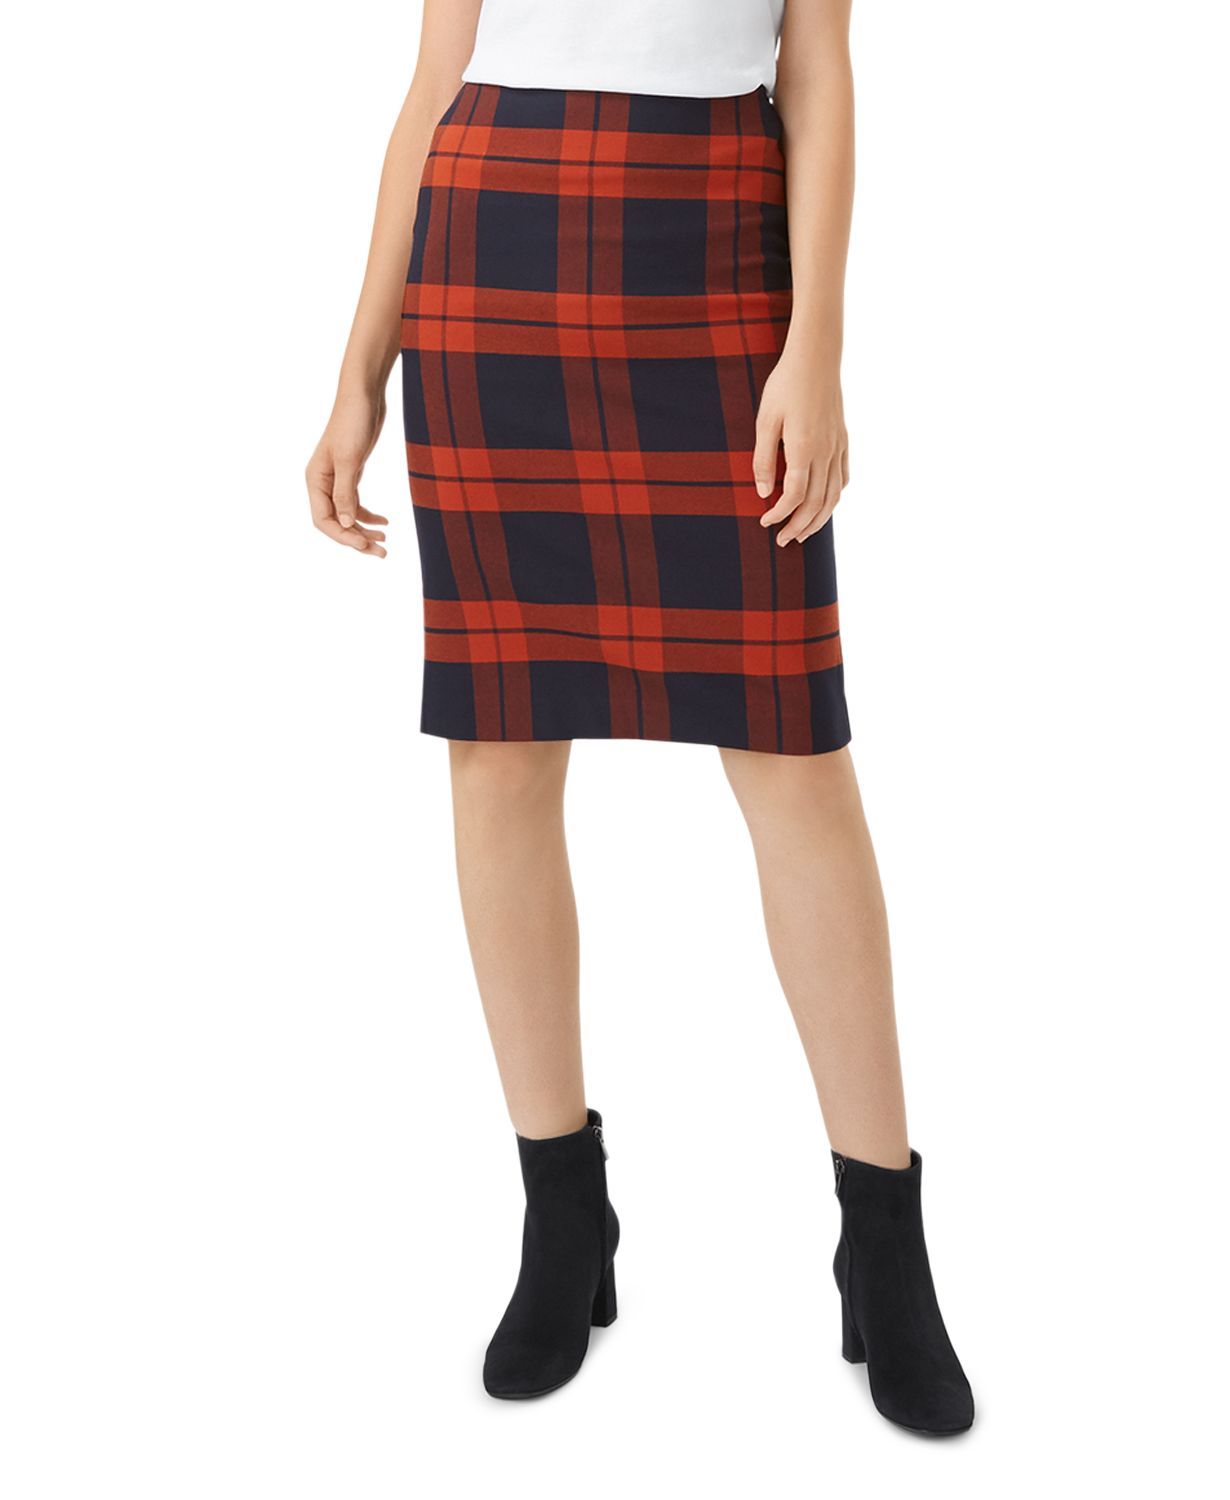 black check skirt outfit